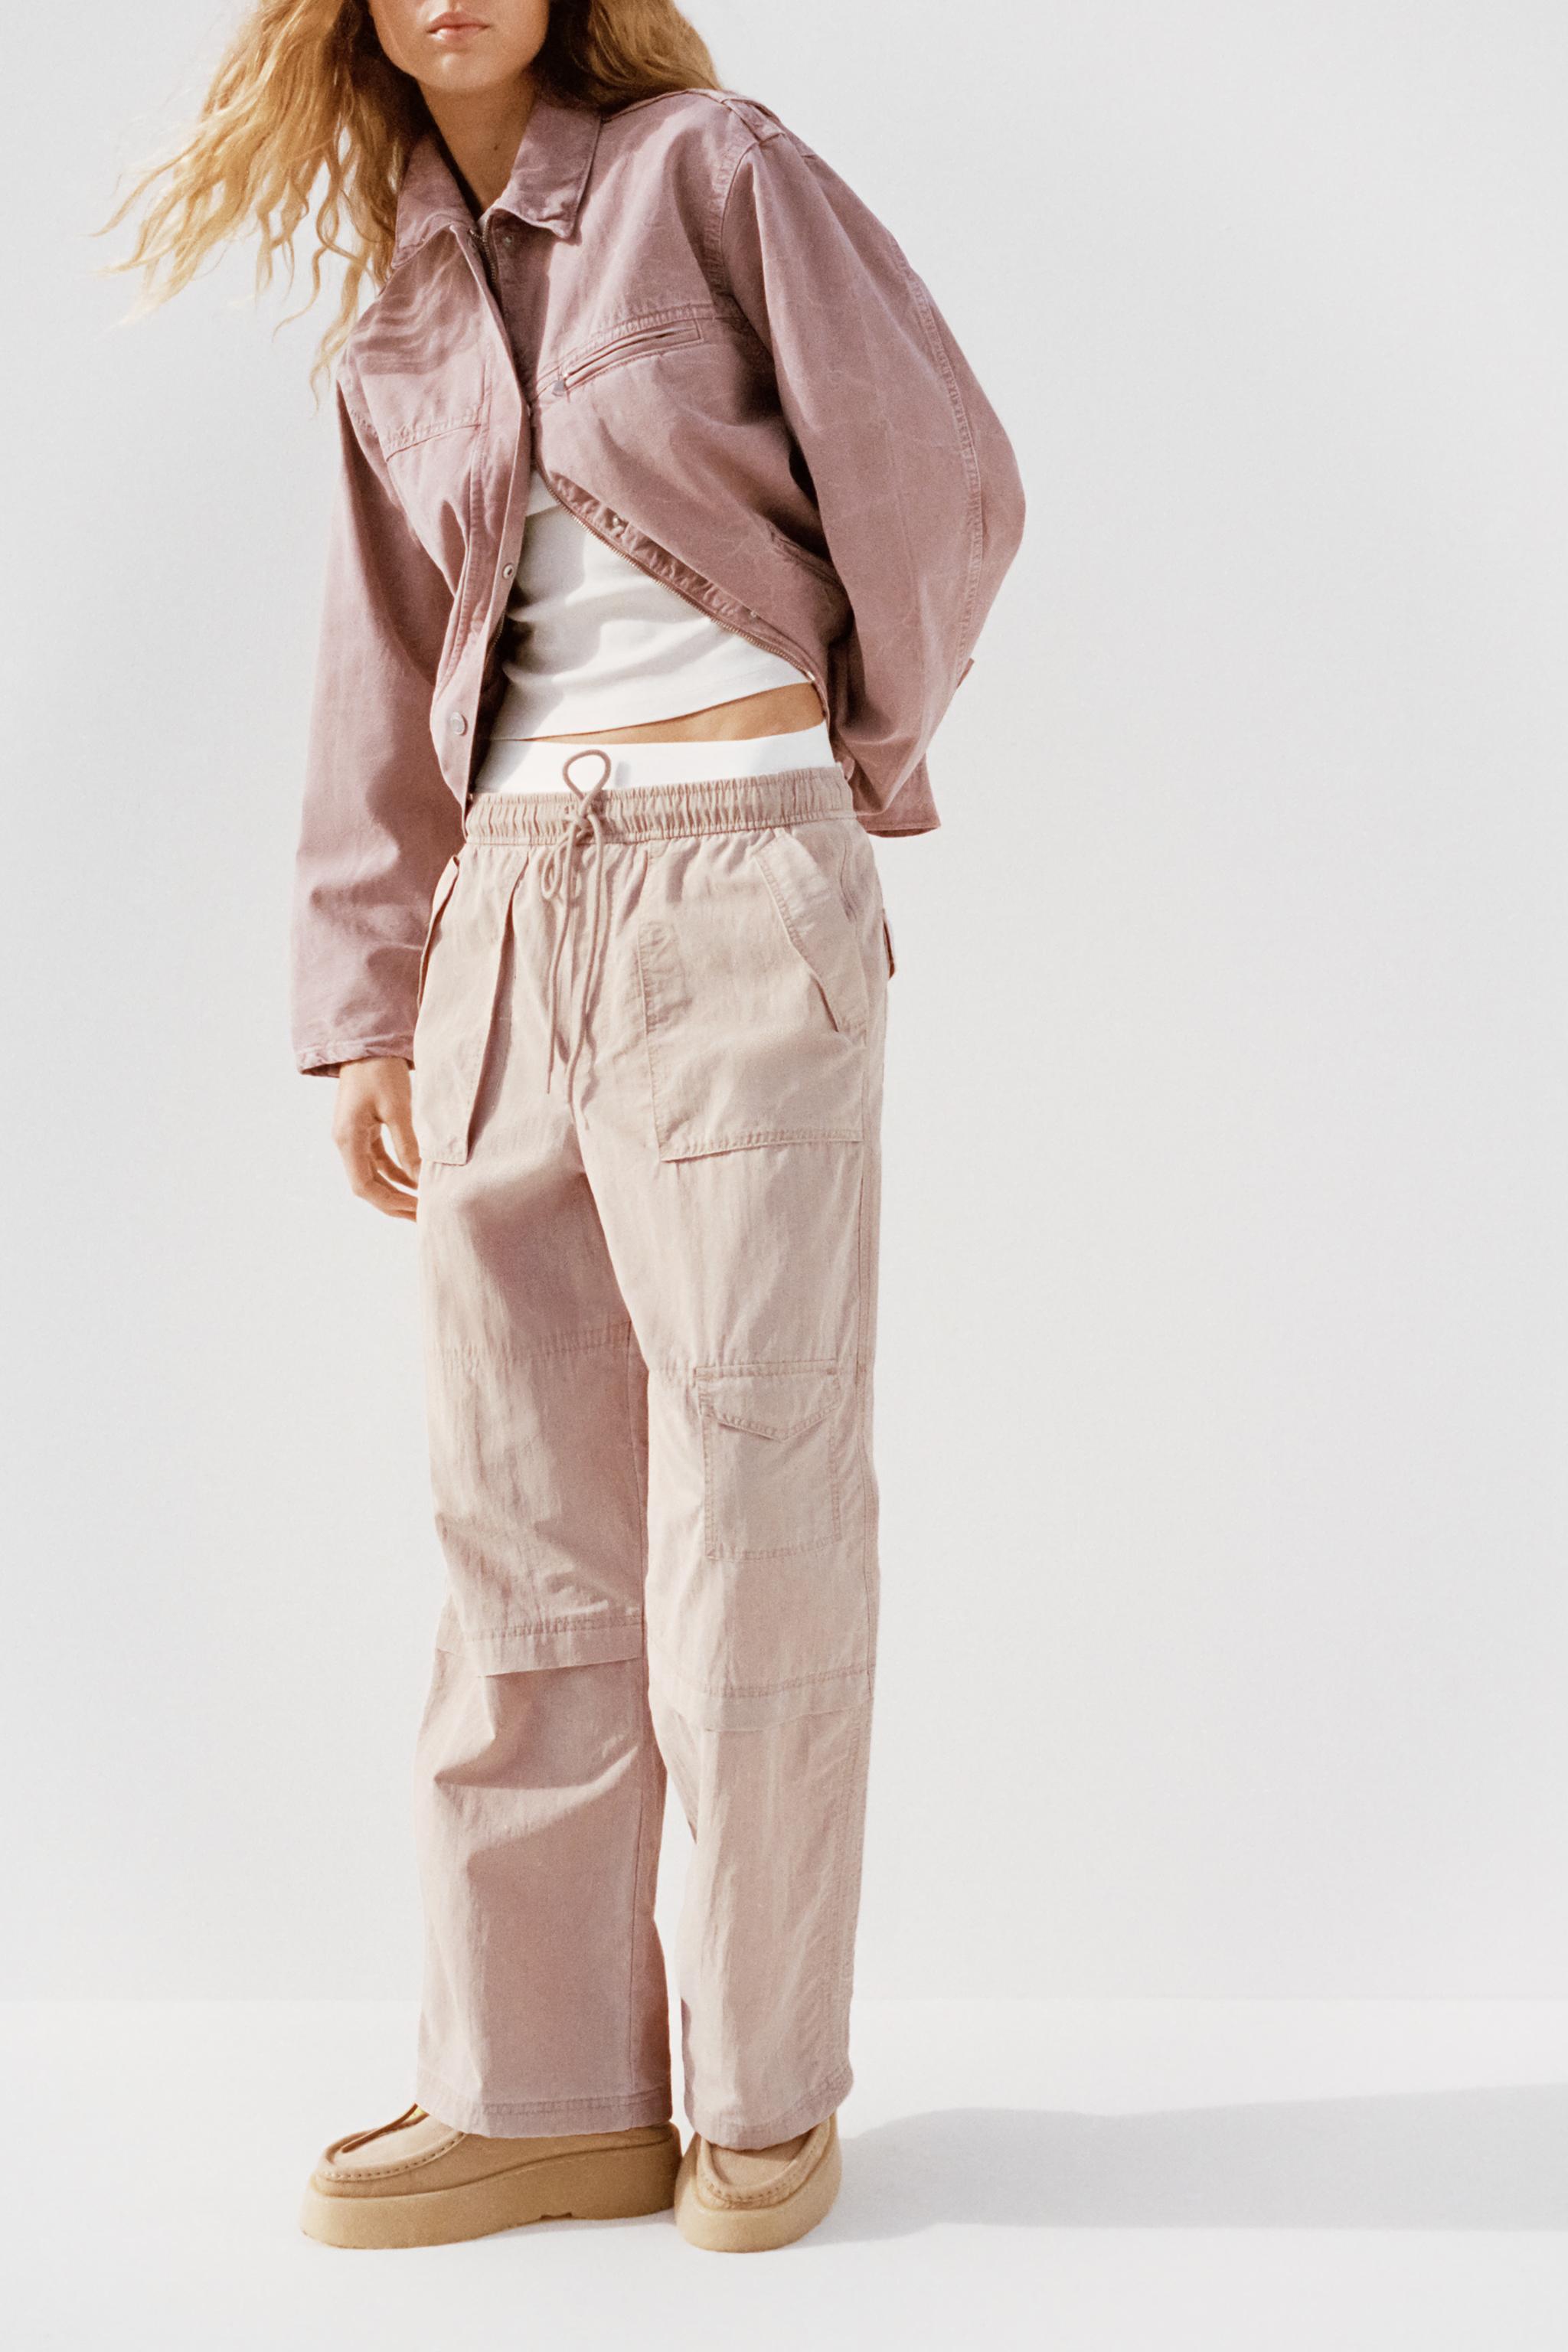 ZARA WOMAN New With Tag HIGH-WAISTED PANTS TROUSERS PINK BUBBLE